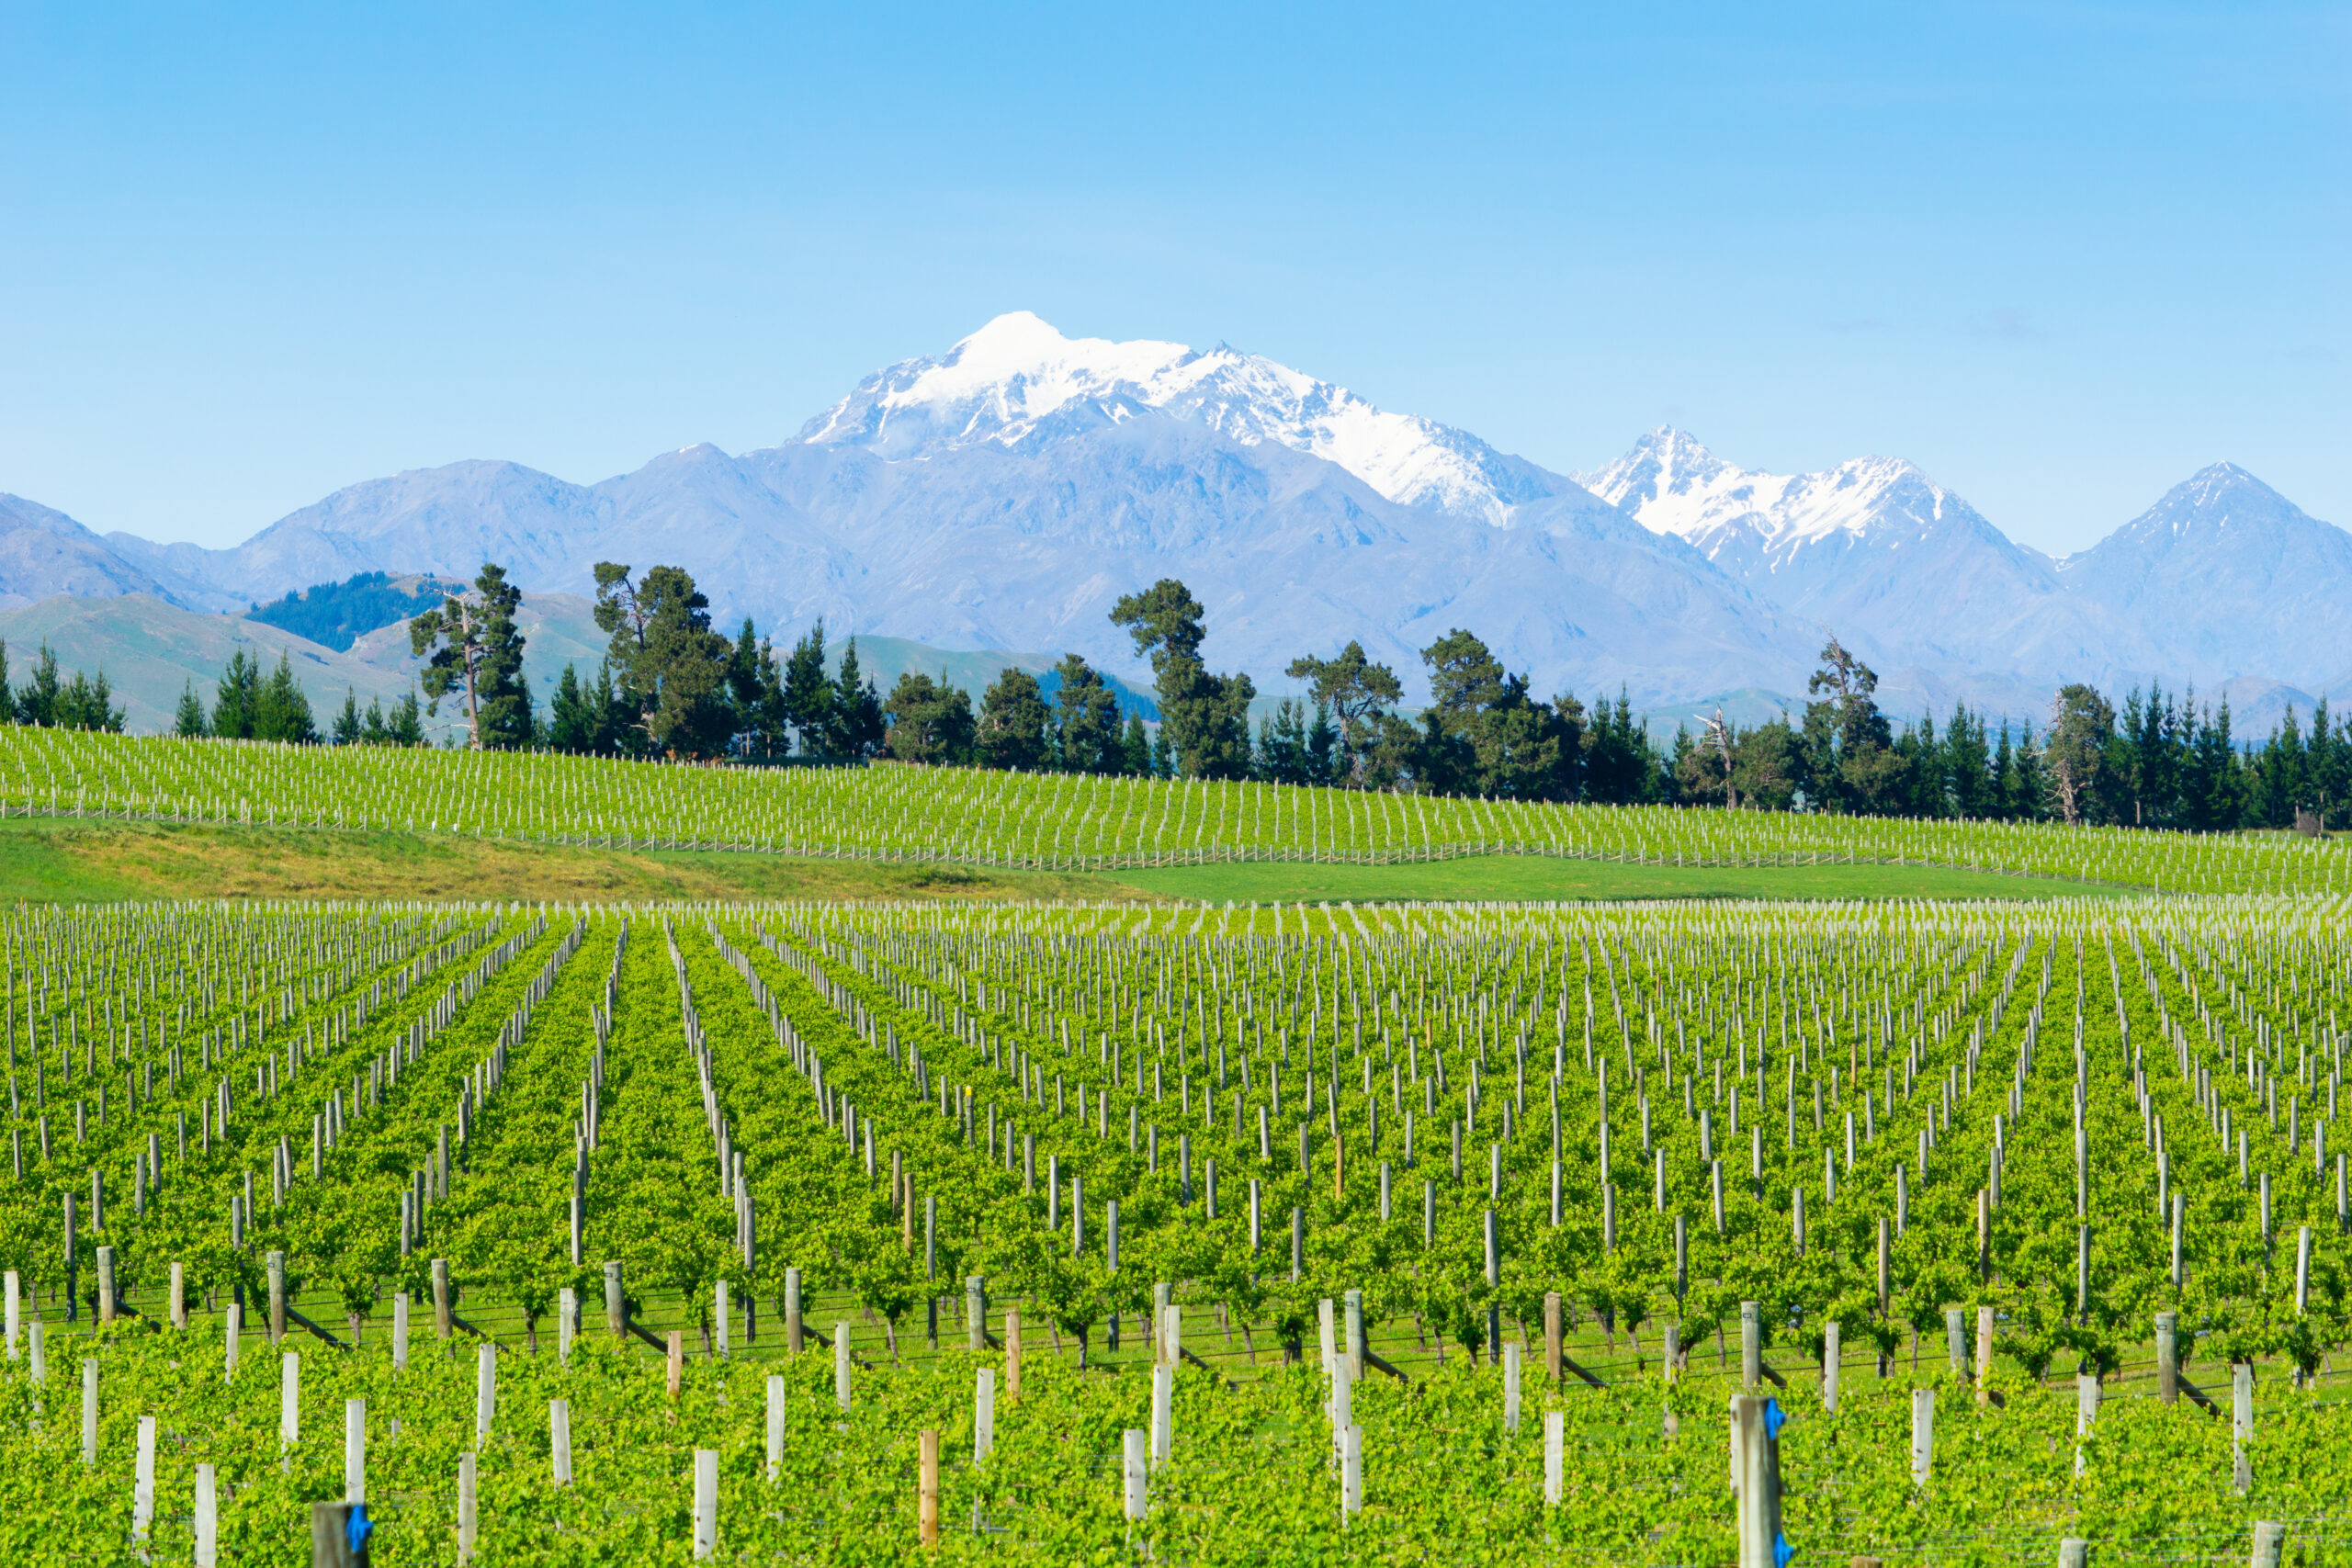 Vineyards in Marlborough long rows of spring growth across flat fields to the remote foothills